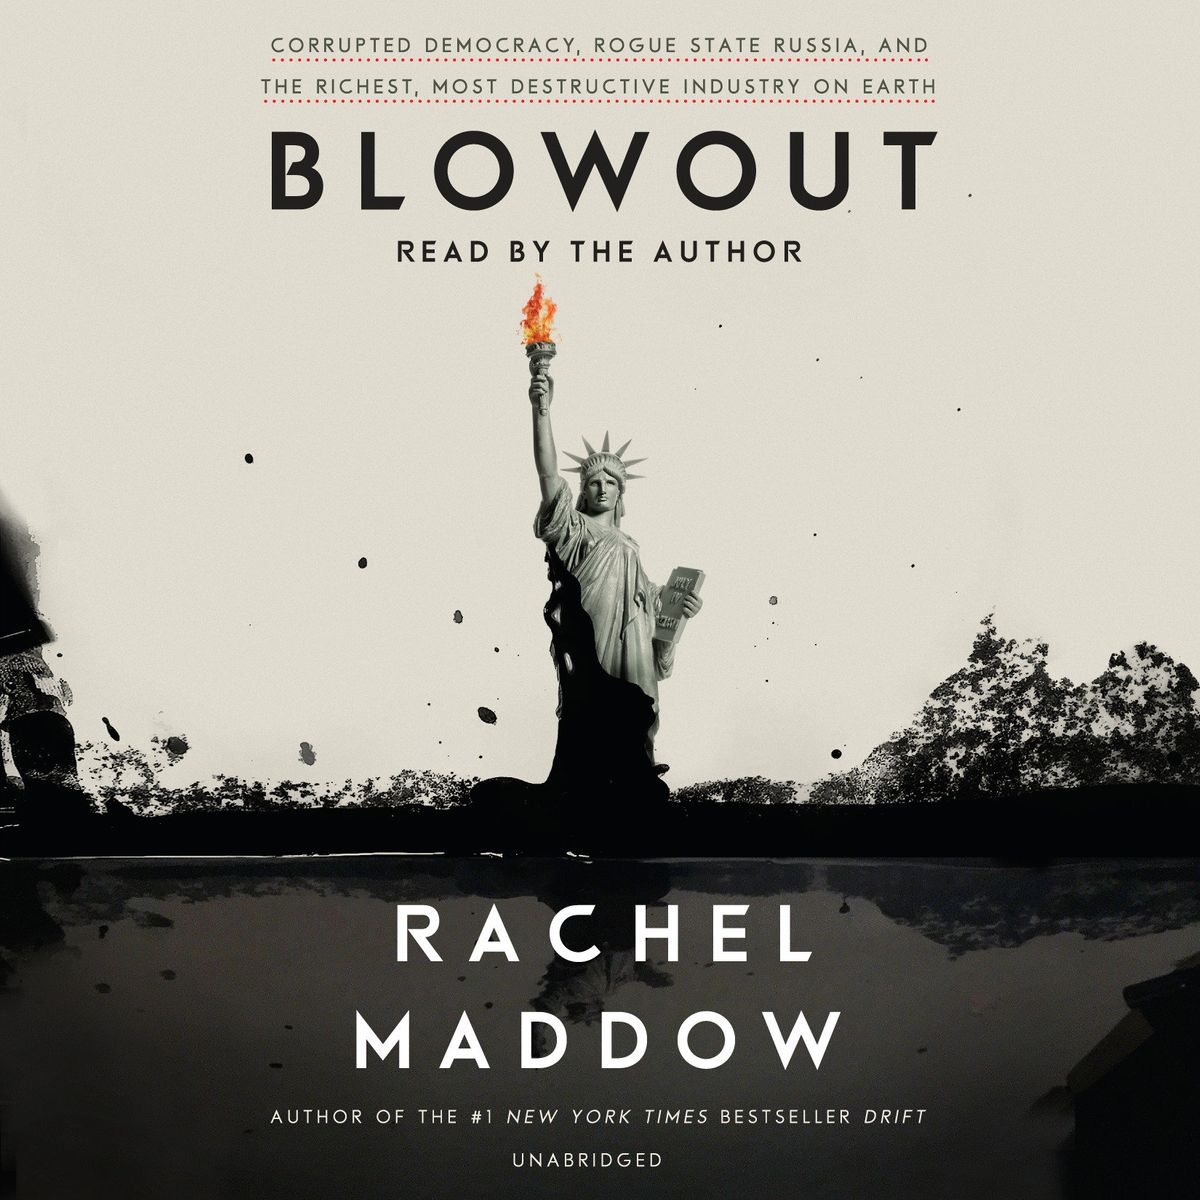 Cover image of Rachel Maddow's 'Blowout'